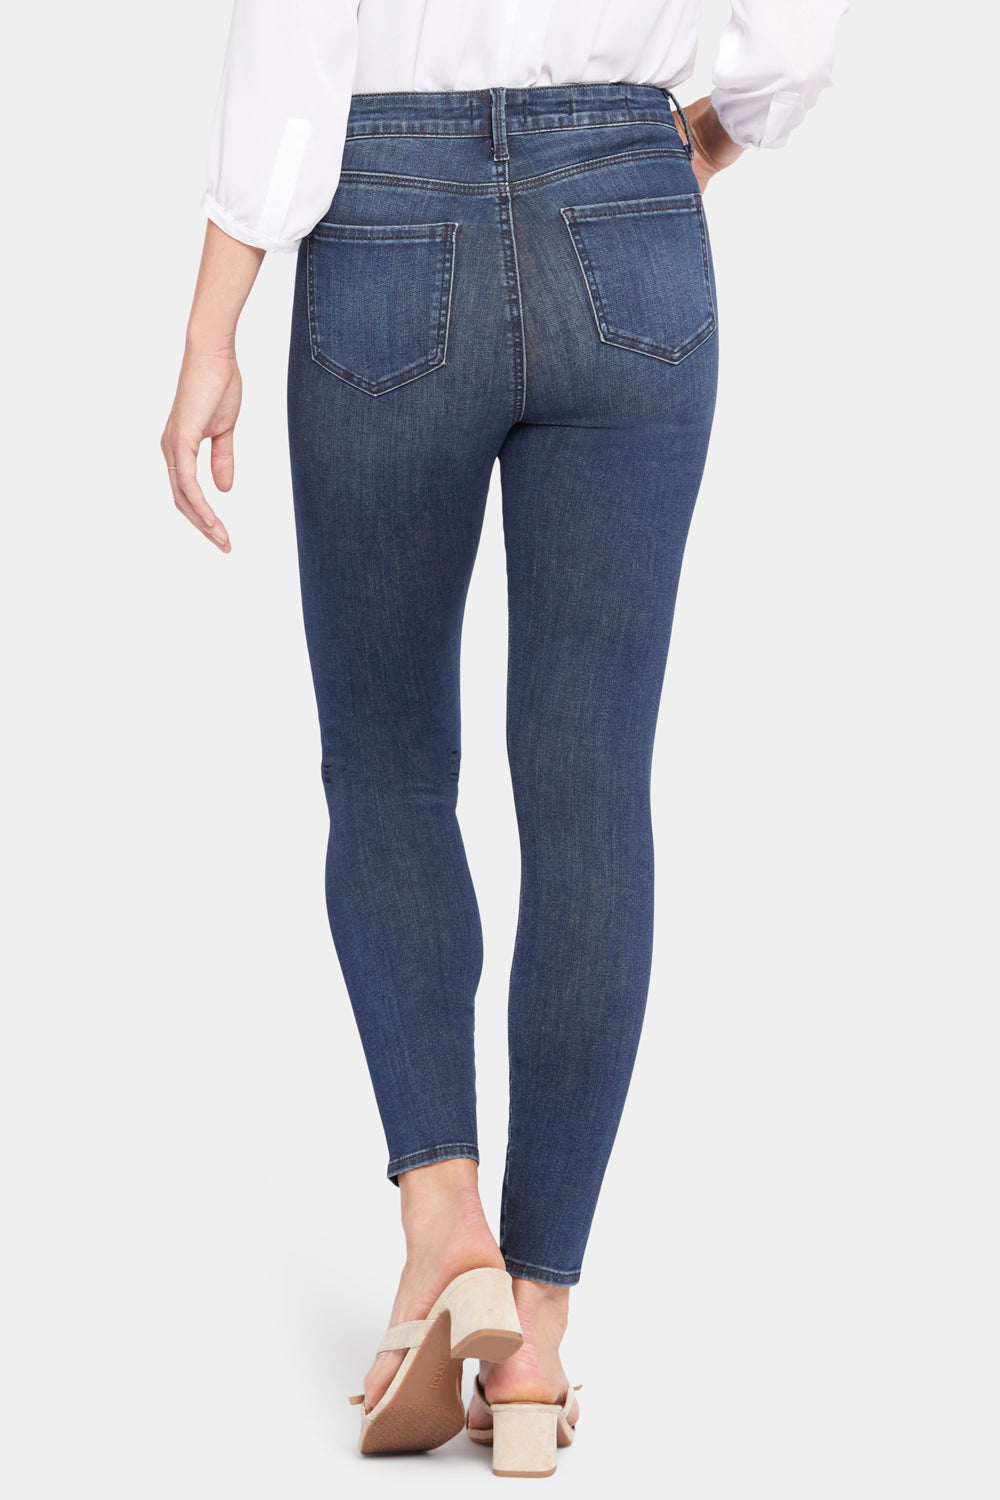 NYDJ Le Silhouette Ami Skinny Jeans With High Rise - Precious